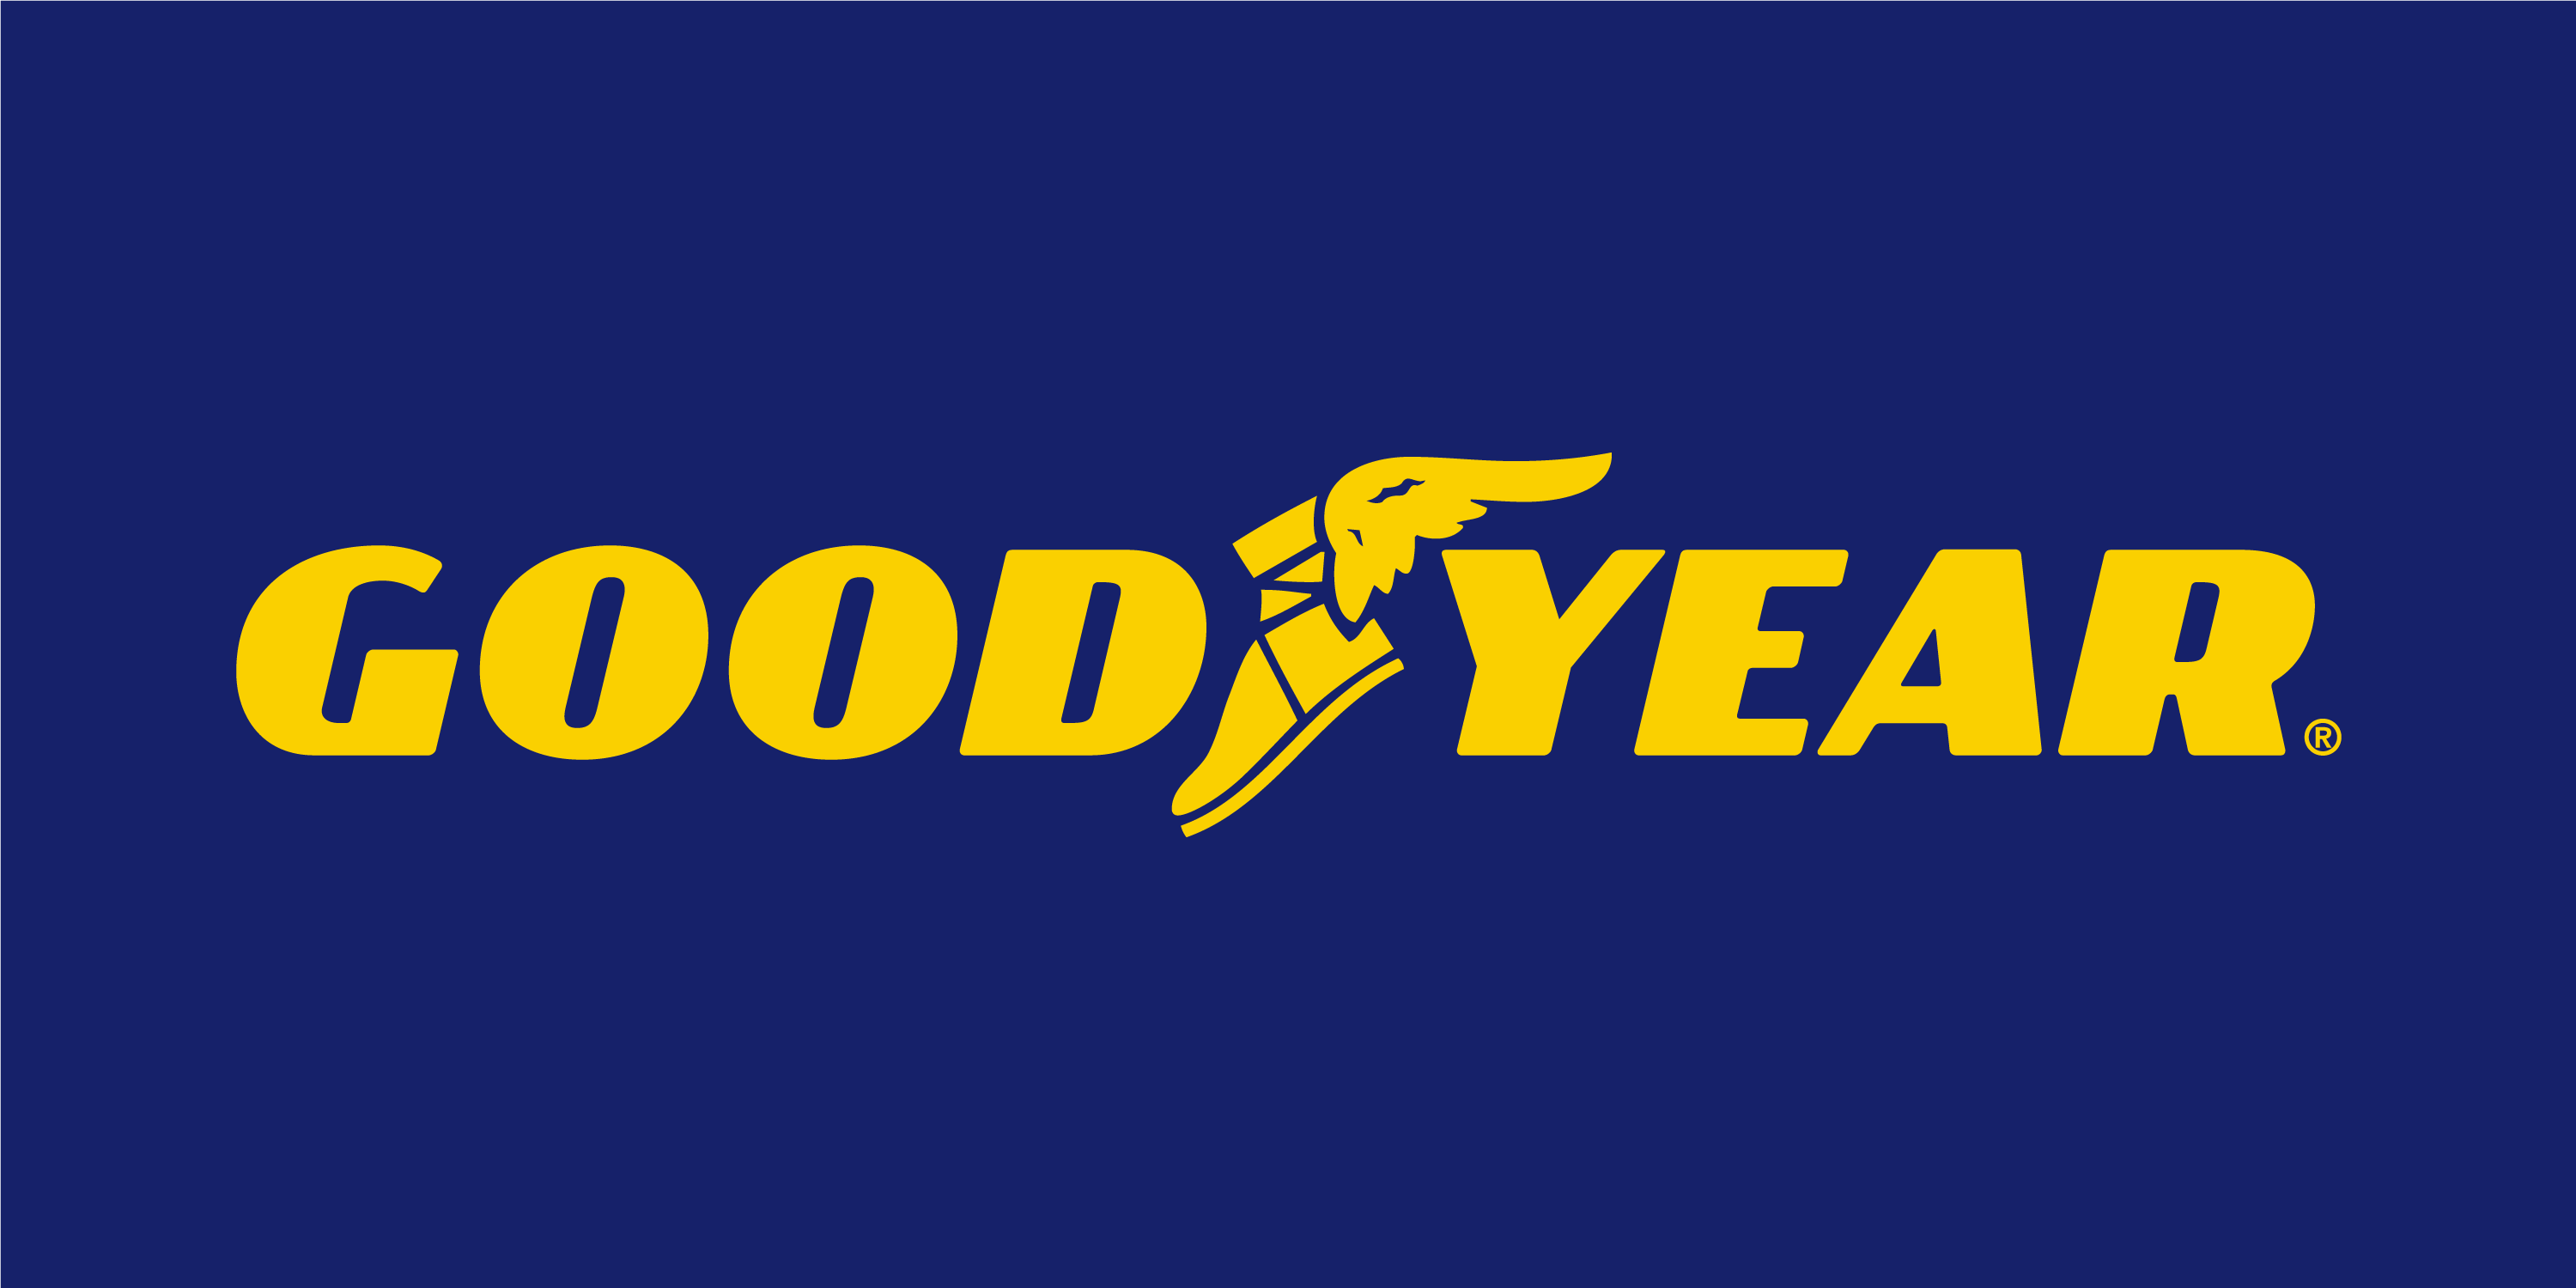 Blue and Yellow Sign Logo - Goodyear Logo Media Gallery | Goodyear Corporate